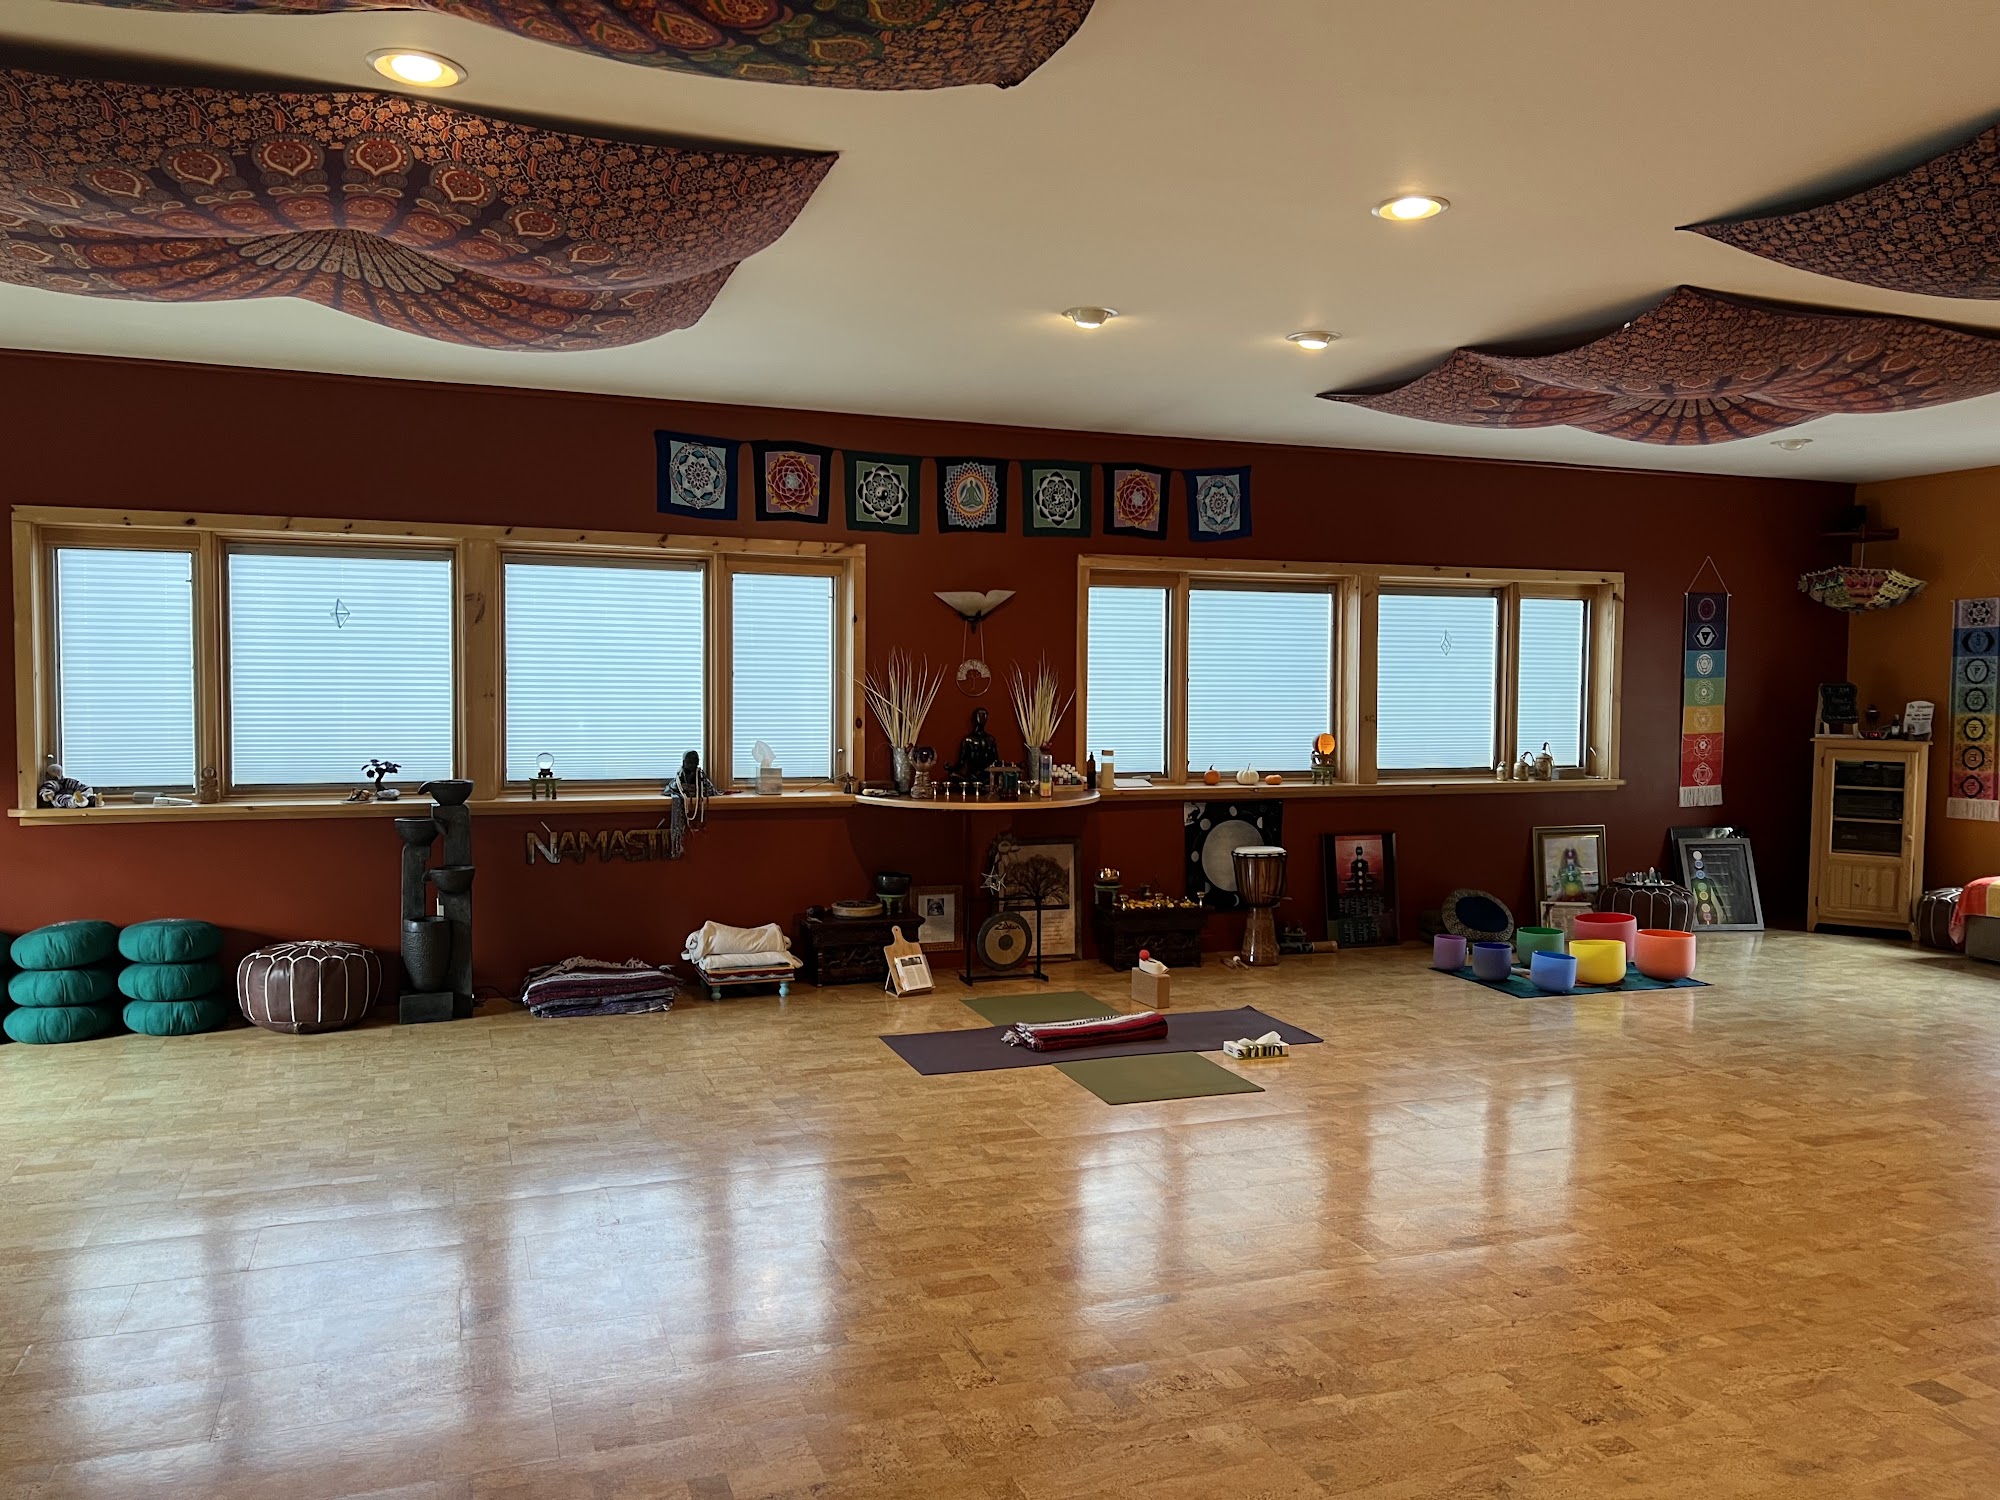 Yoga In The Adirondacks 2 Coulter Rd, Bakers Mills New York 12811